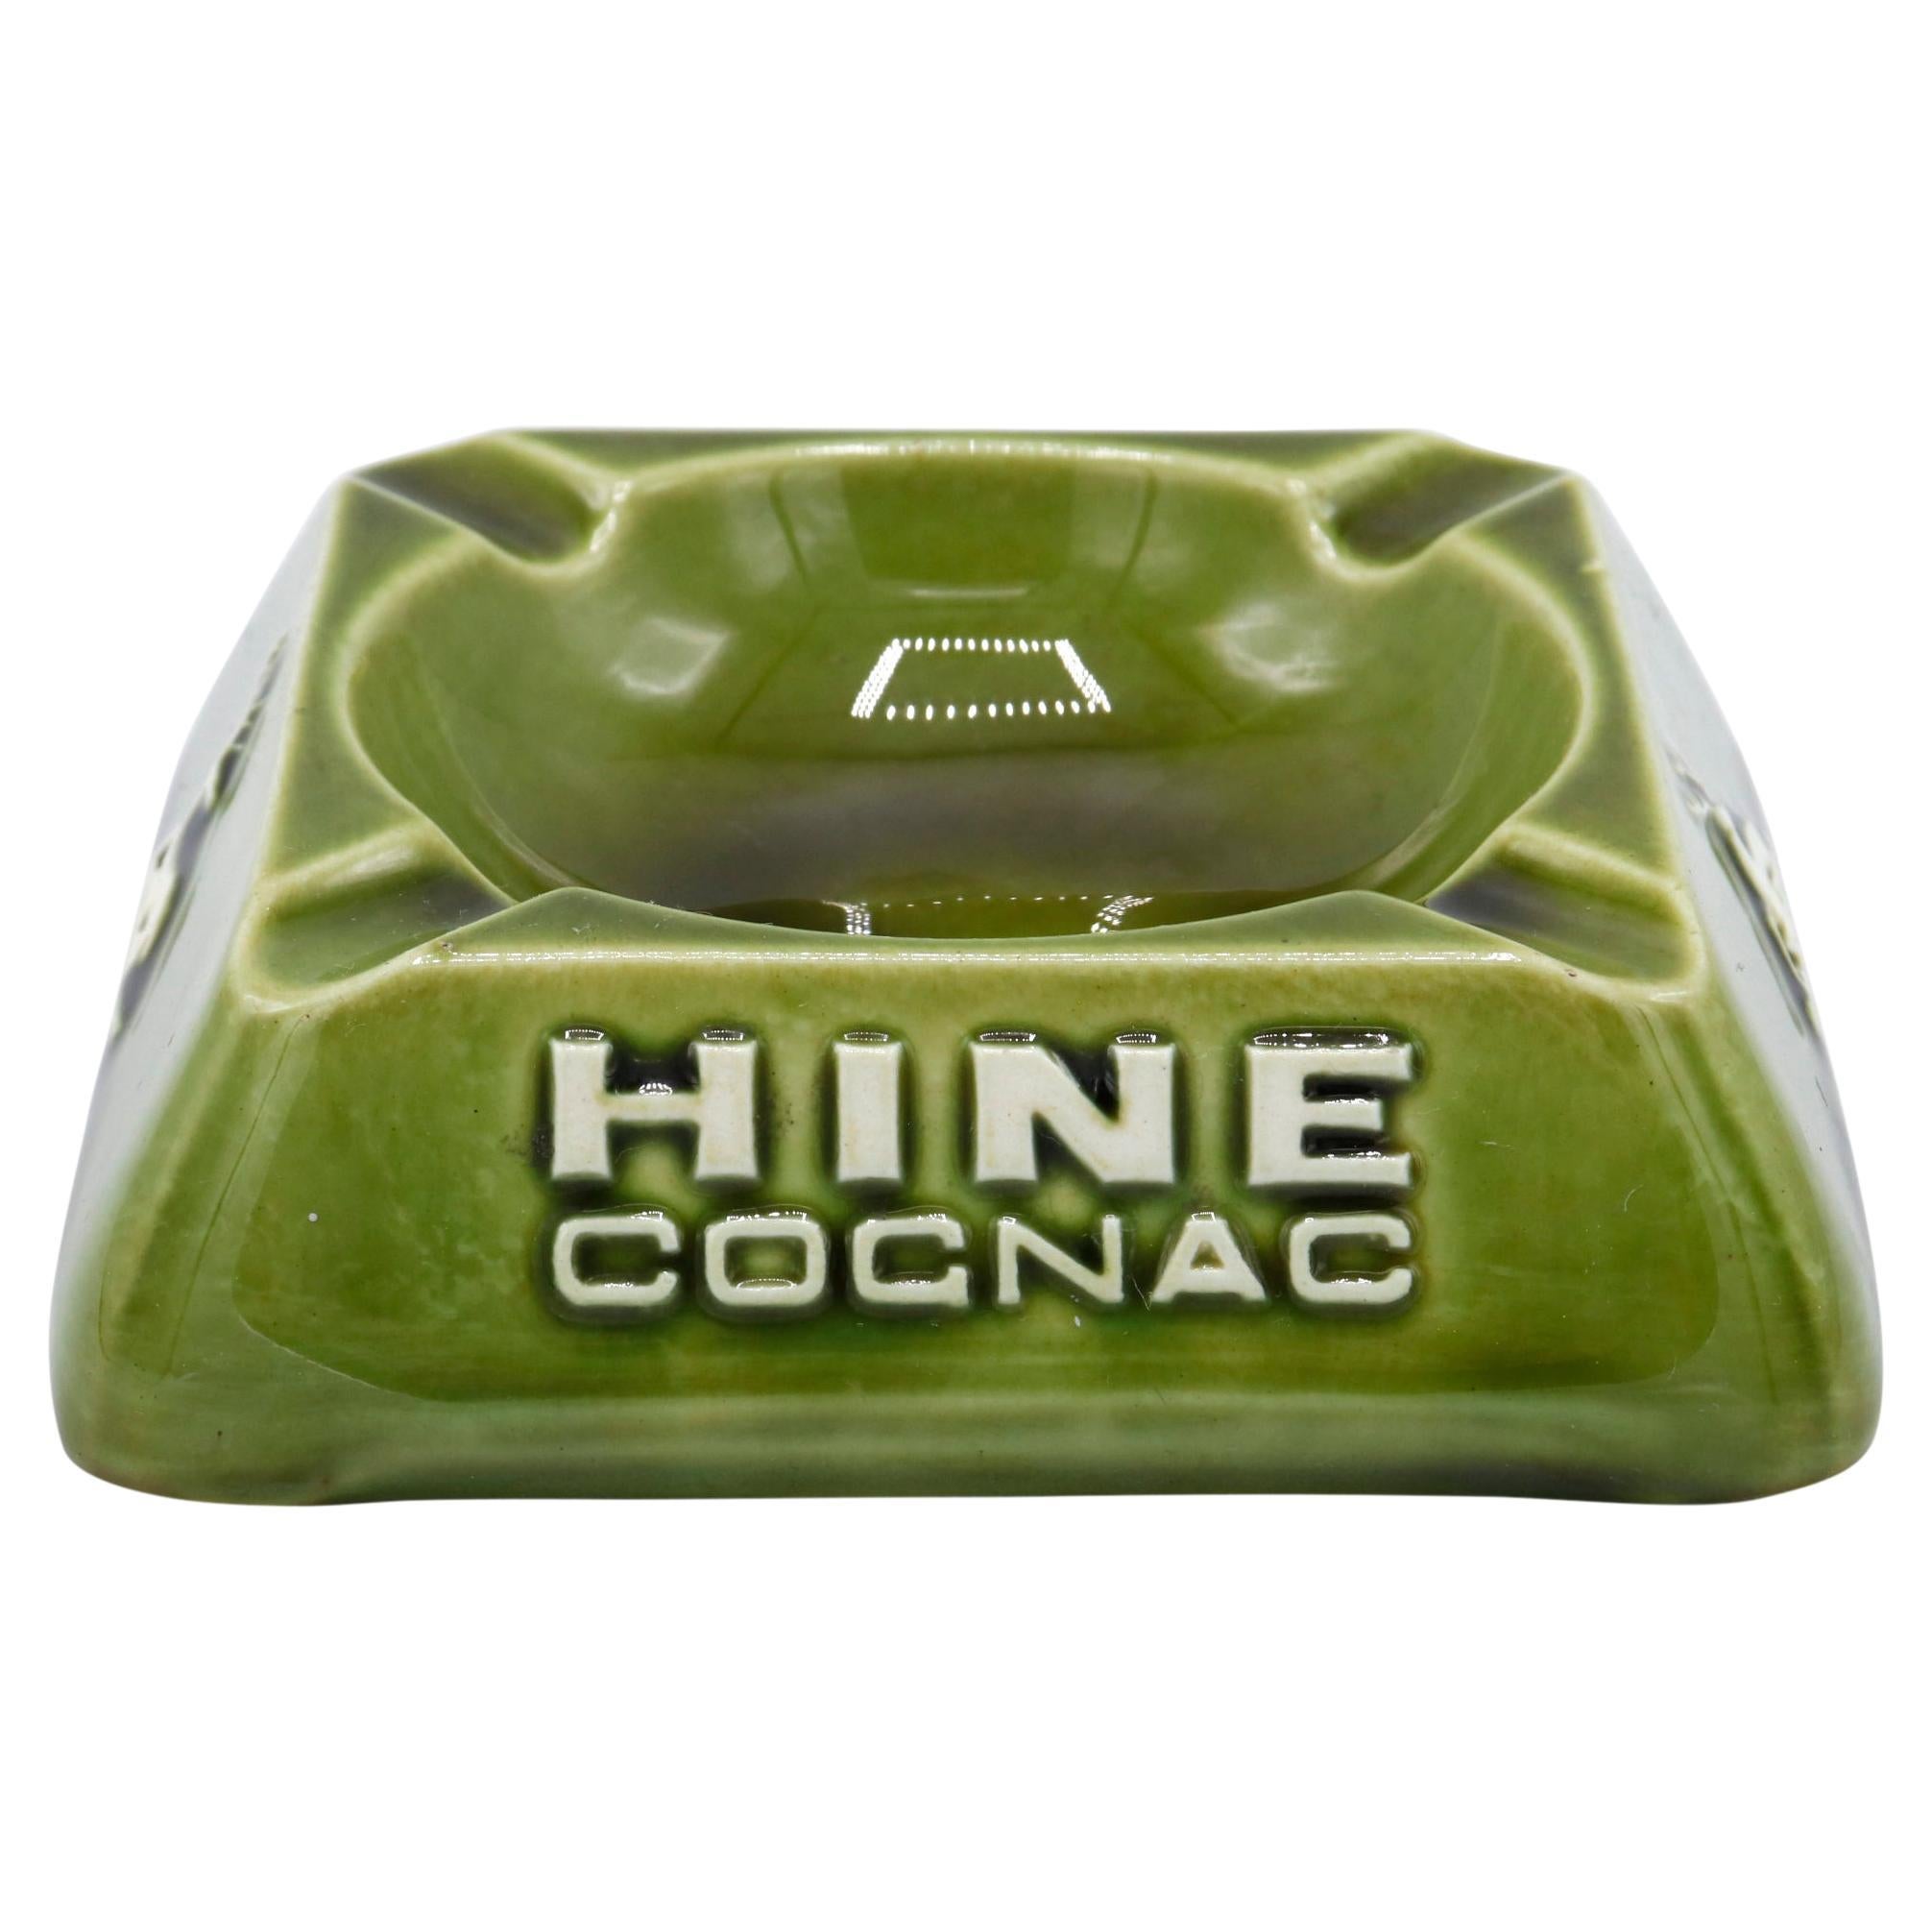 Hine Cognac French Ceramic Ashtray For Sale